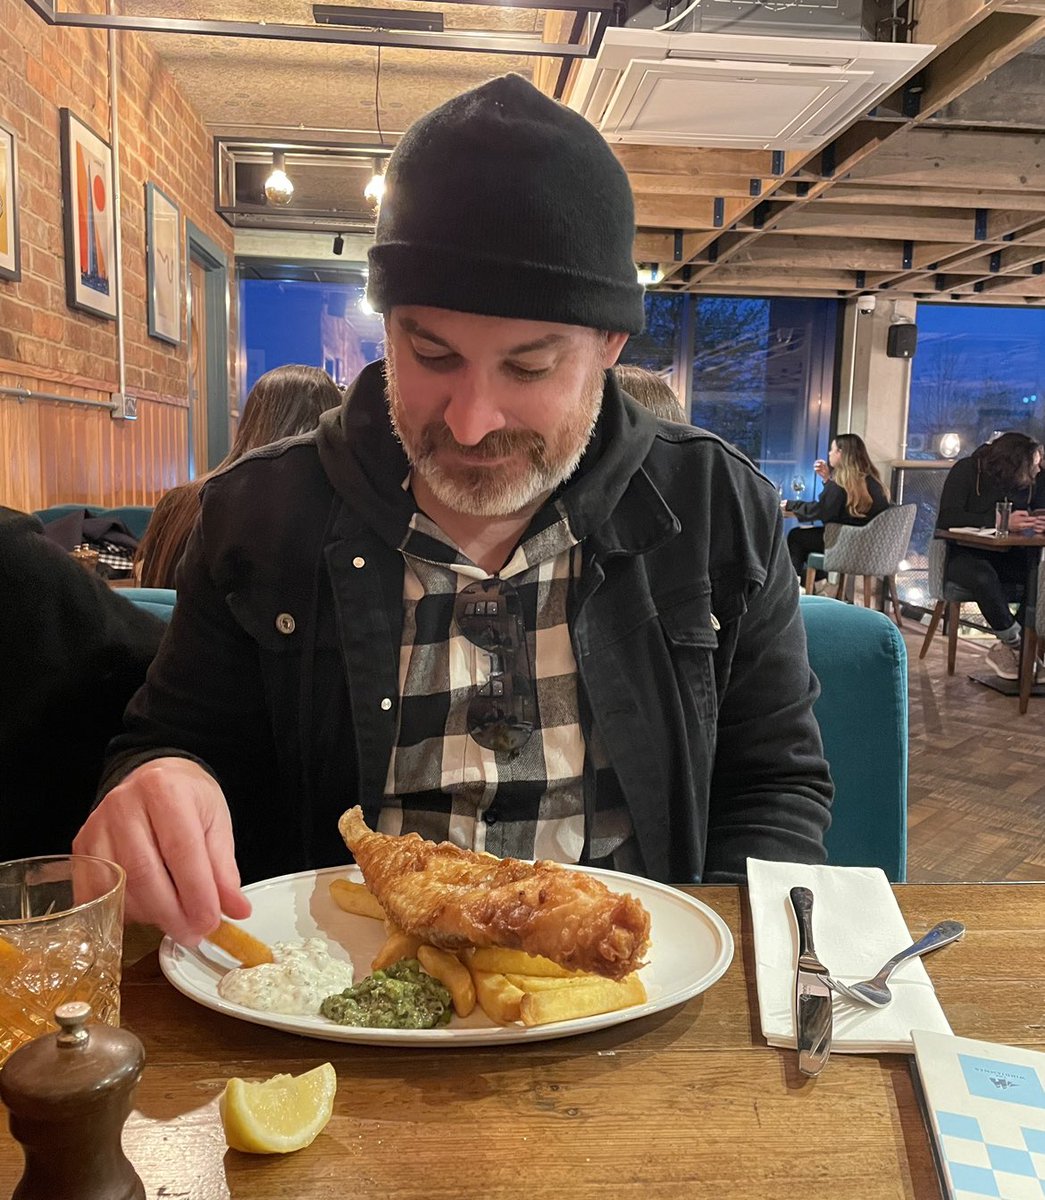 Happy birthday to my friend and podcast partner on @forcecenterpod, @kennapzok—pictured here in state of calm bliss, smiling at a food.